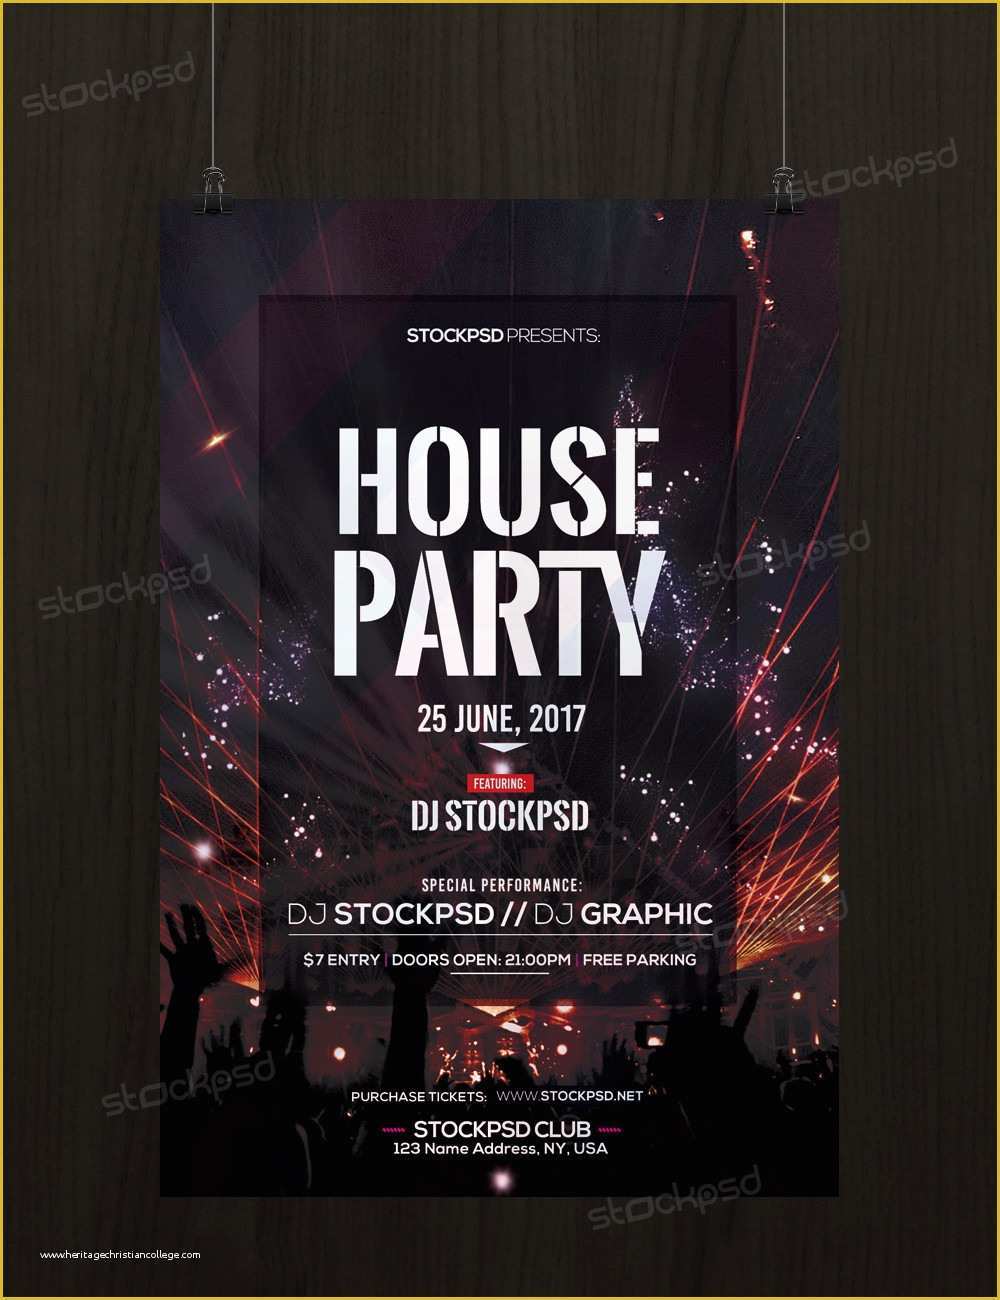 Psd Flyer Templates Free Download Of 91 Premium & Free Flyer Templates Psd Absolutely Free to